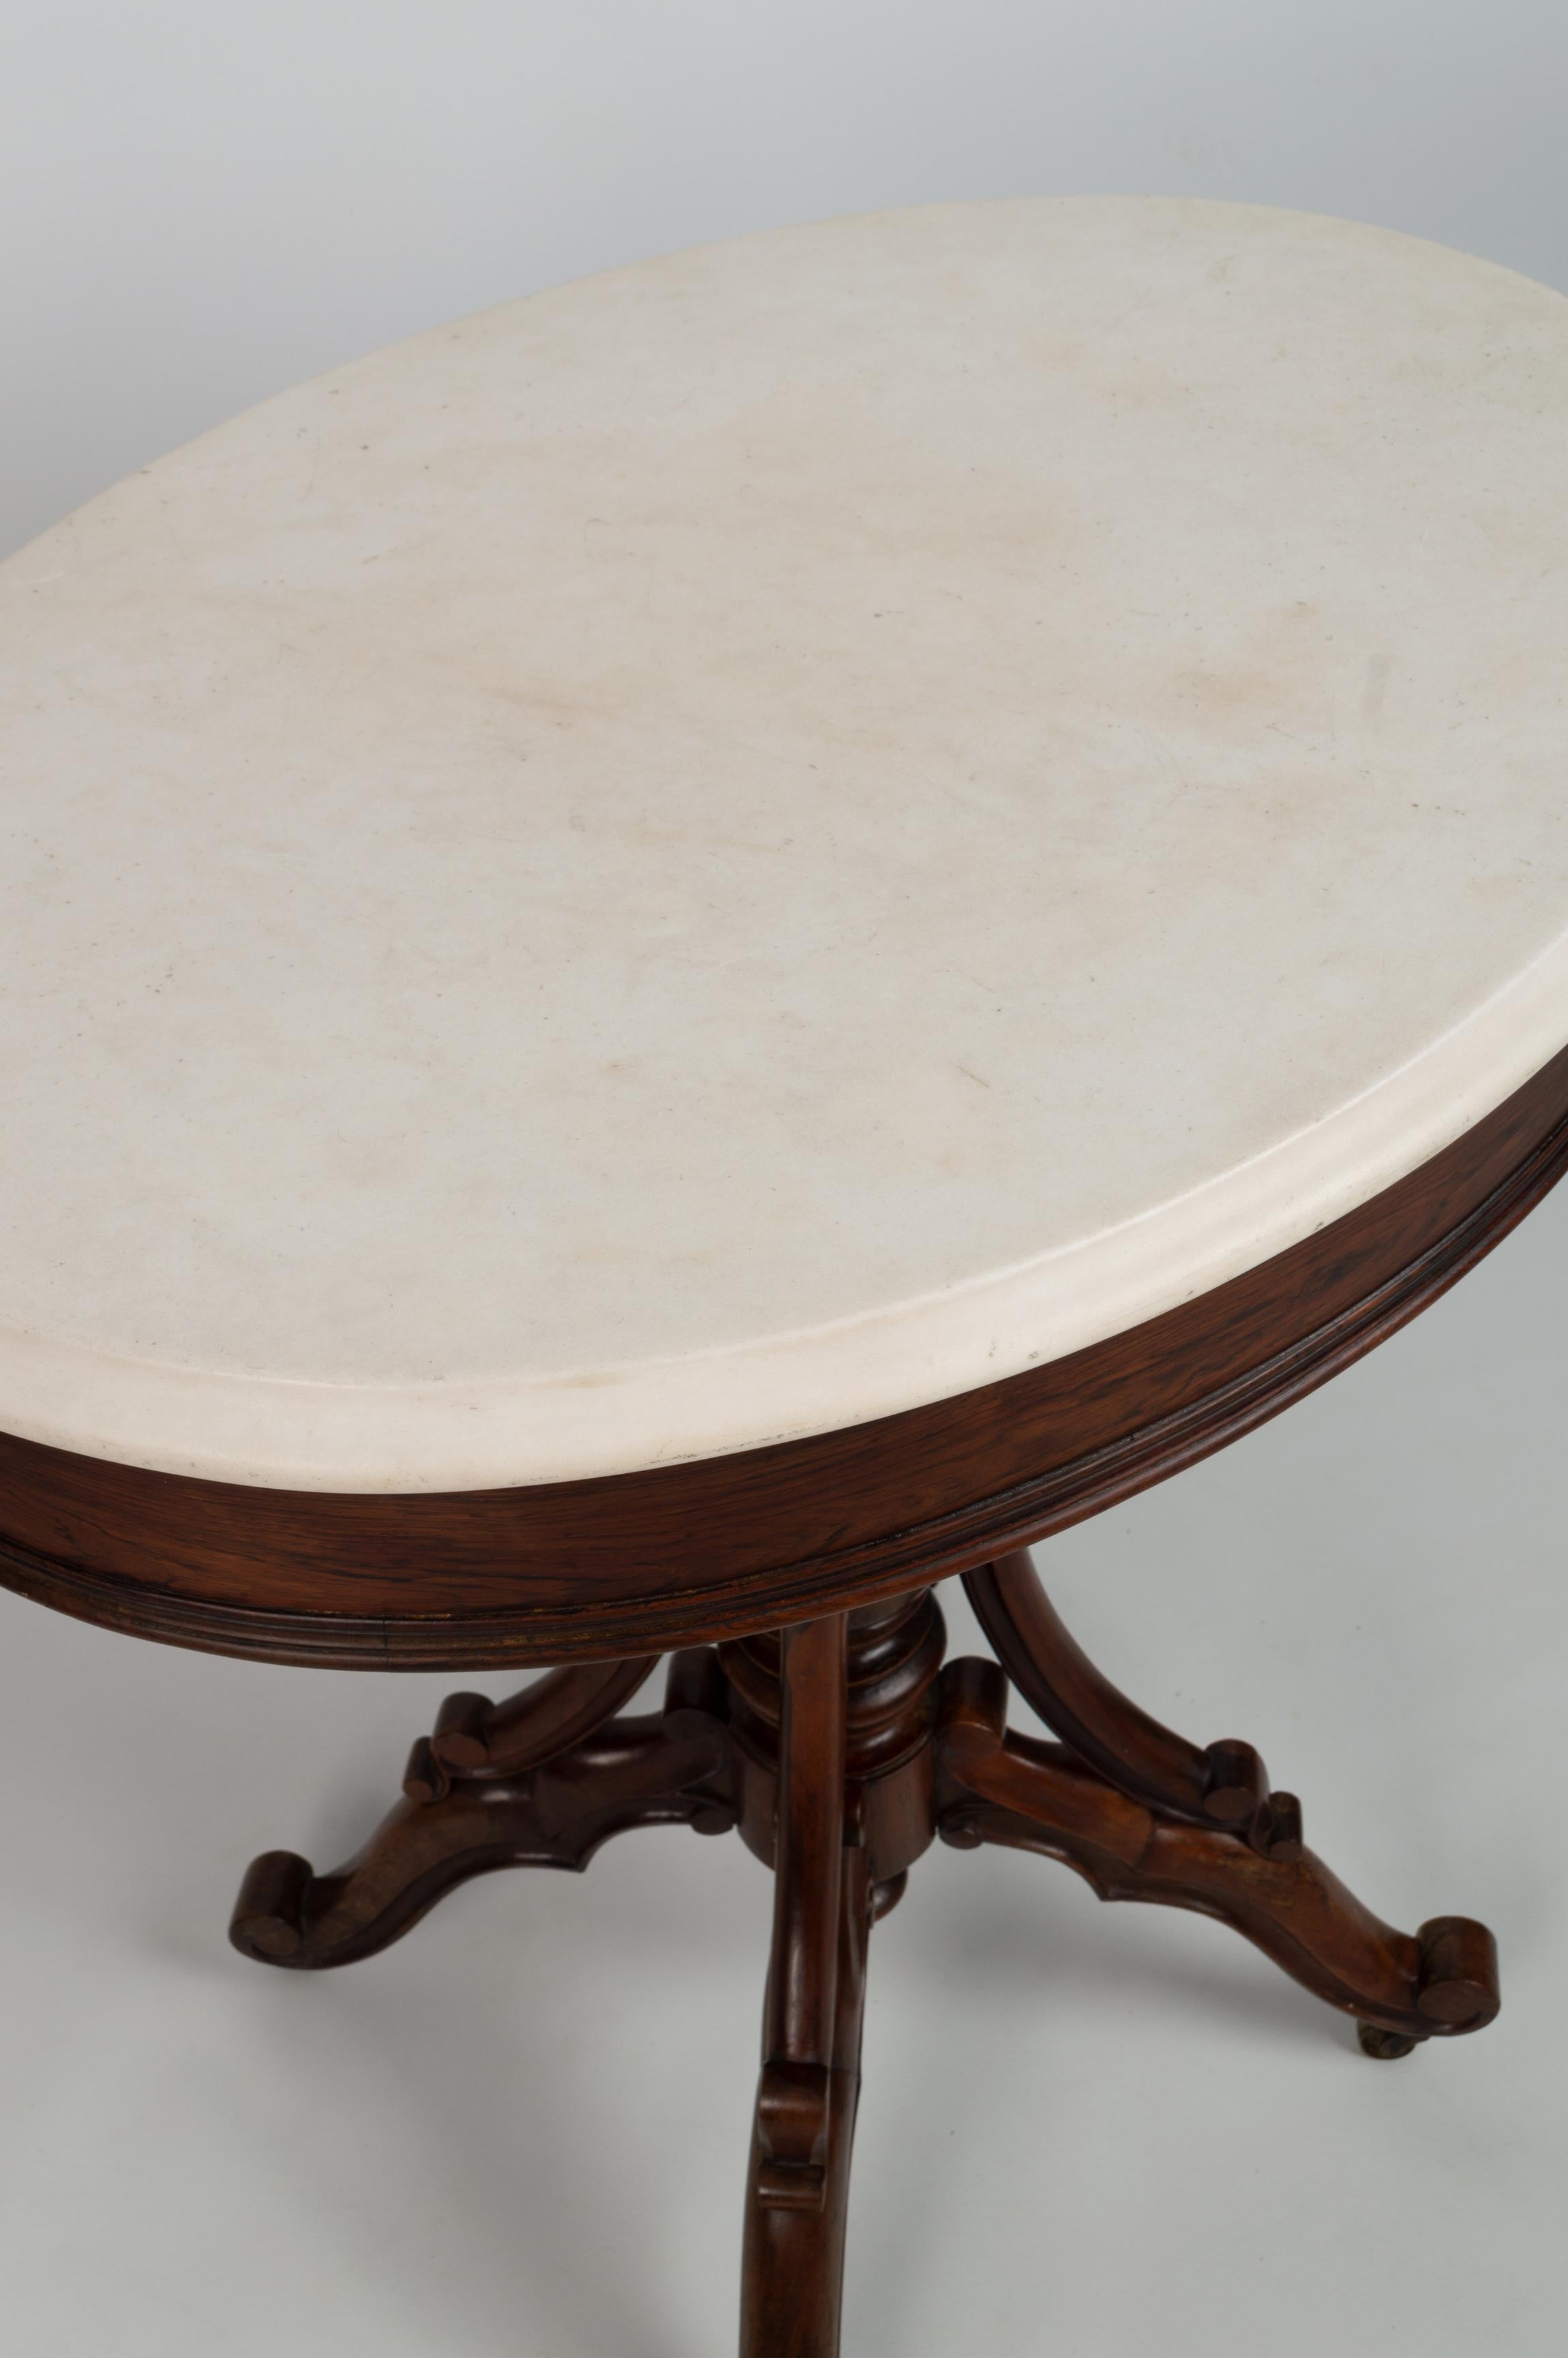 Antique French 19th Century Rosewood and Marble Oval Occasional Table C1850 For Sale 6